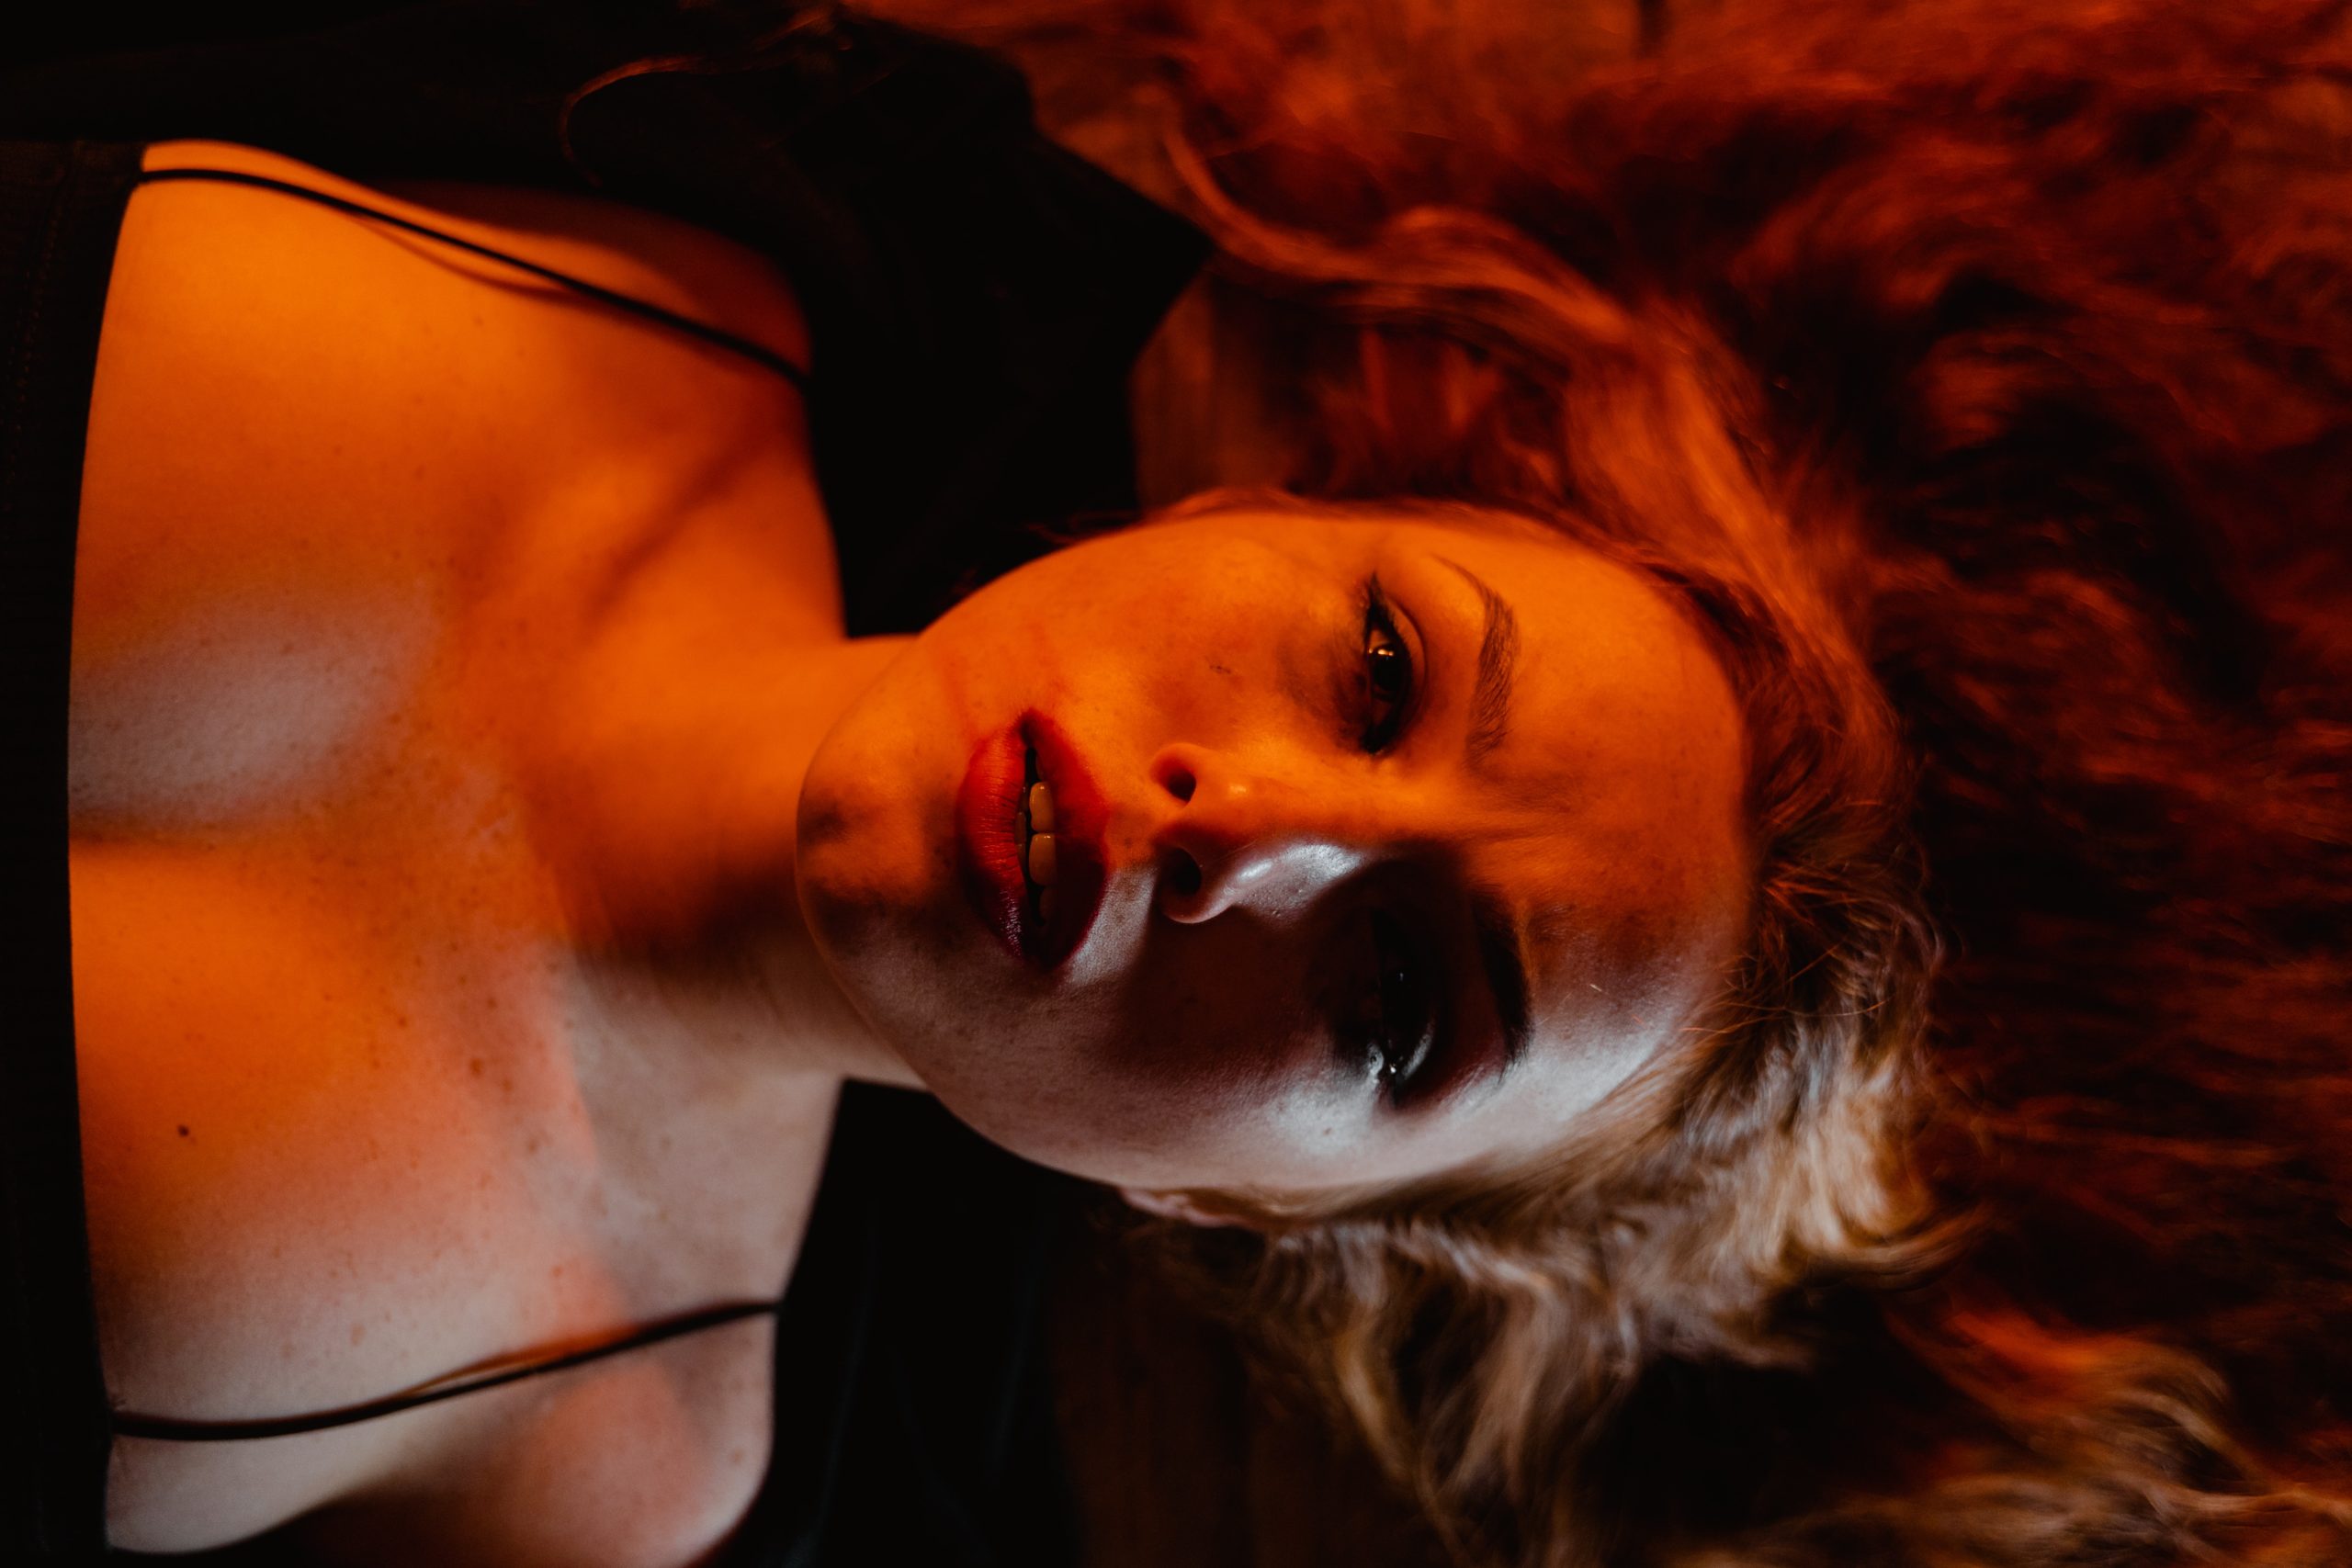 A woman being lit in red, laying down, looking upwards at the camera dramatically.